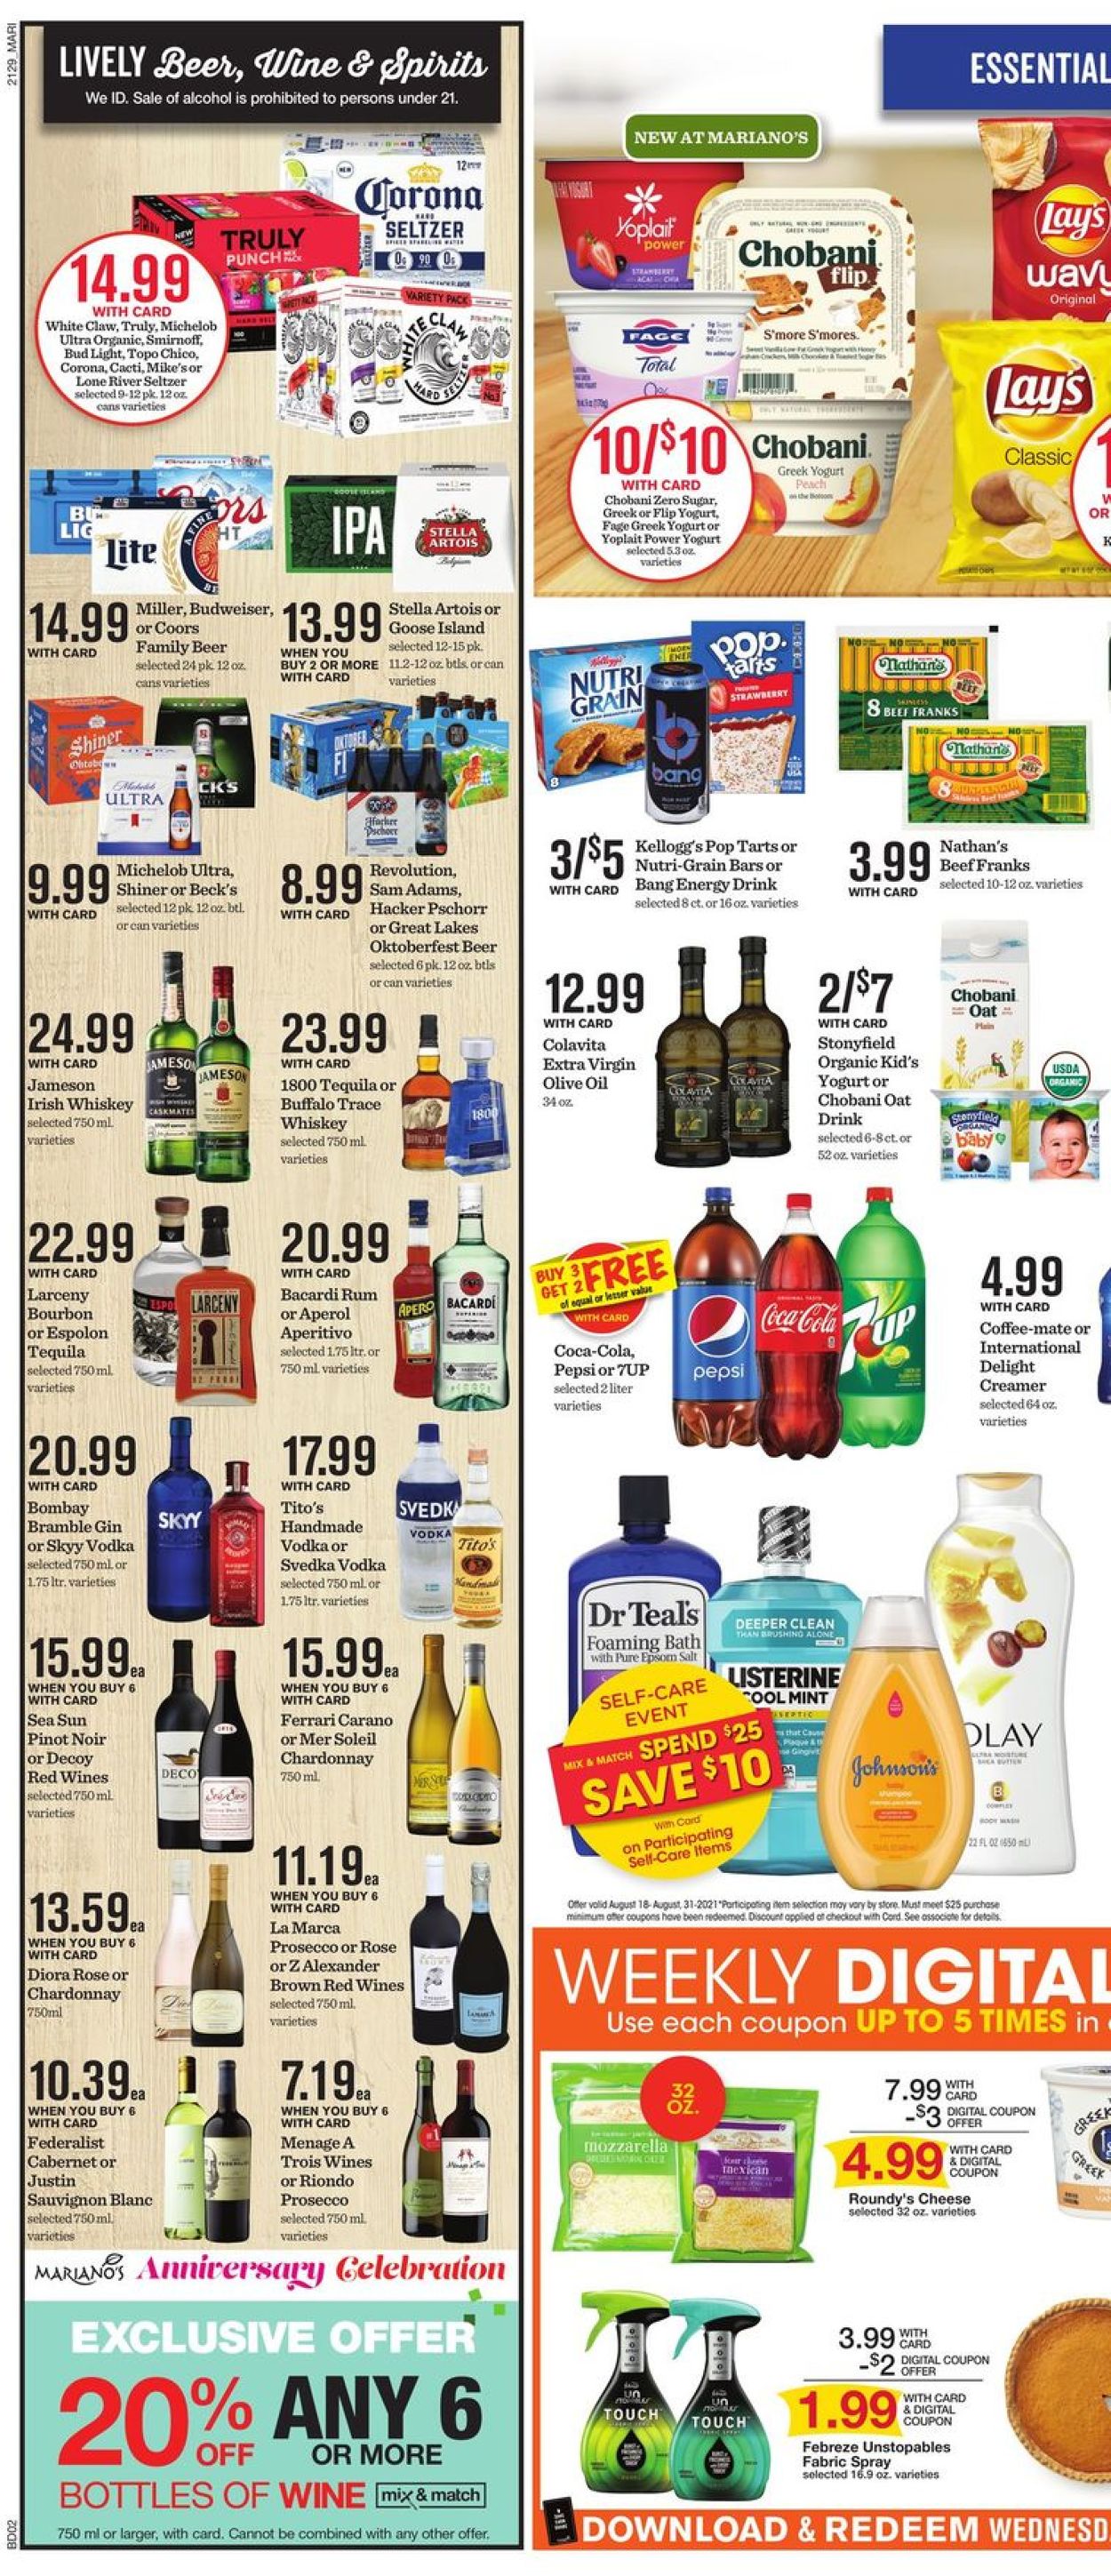 Mariano’s Ad from 08/18/2021